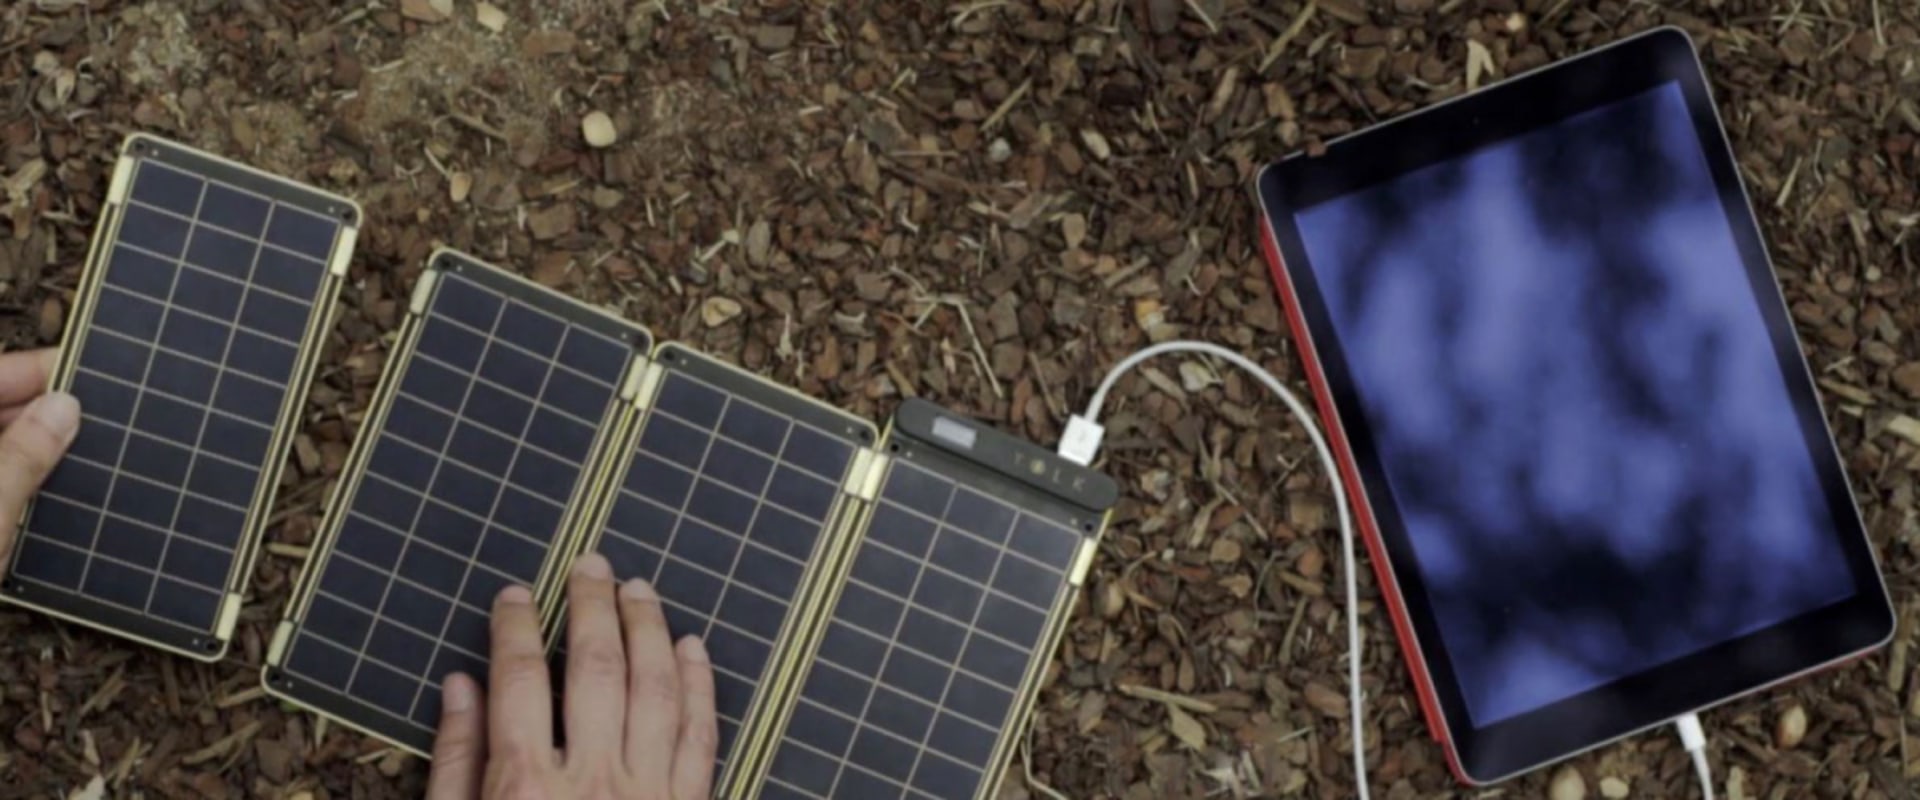 Can a Small Solar Panel Charge Your Phone?